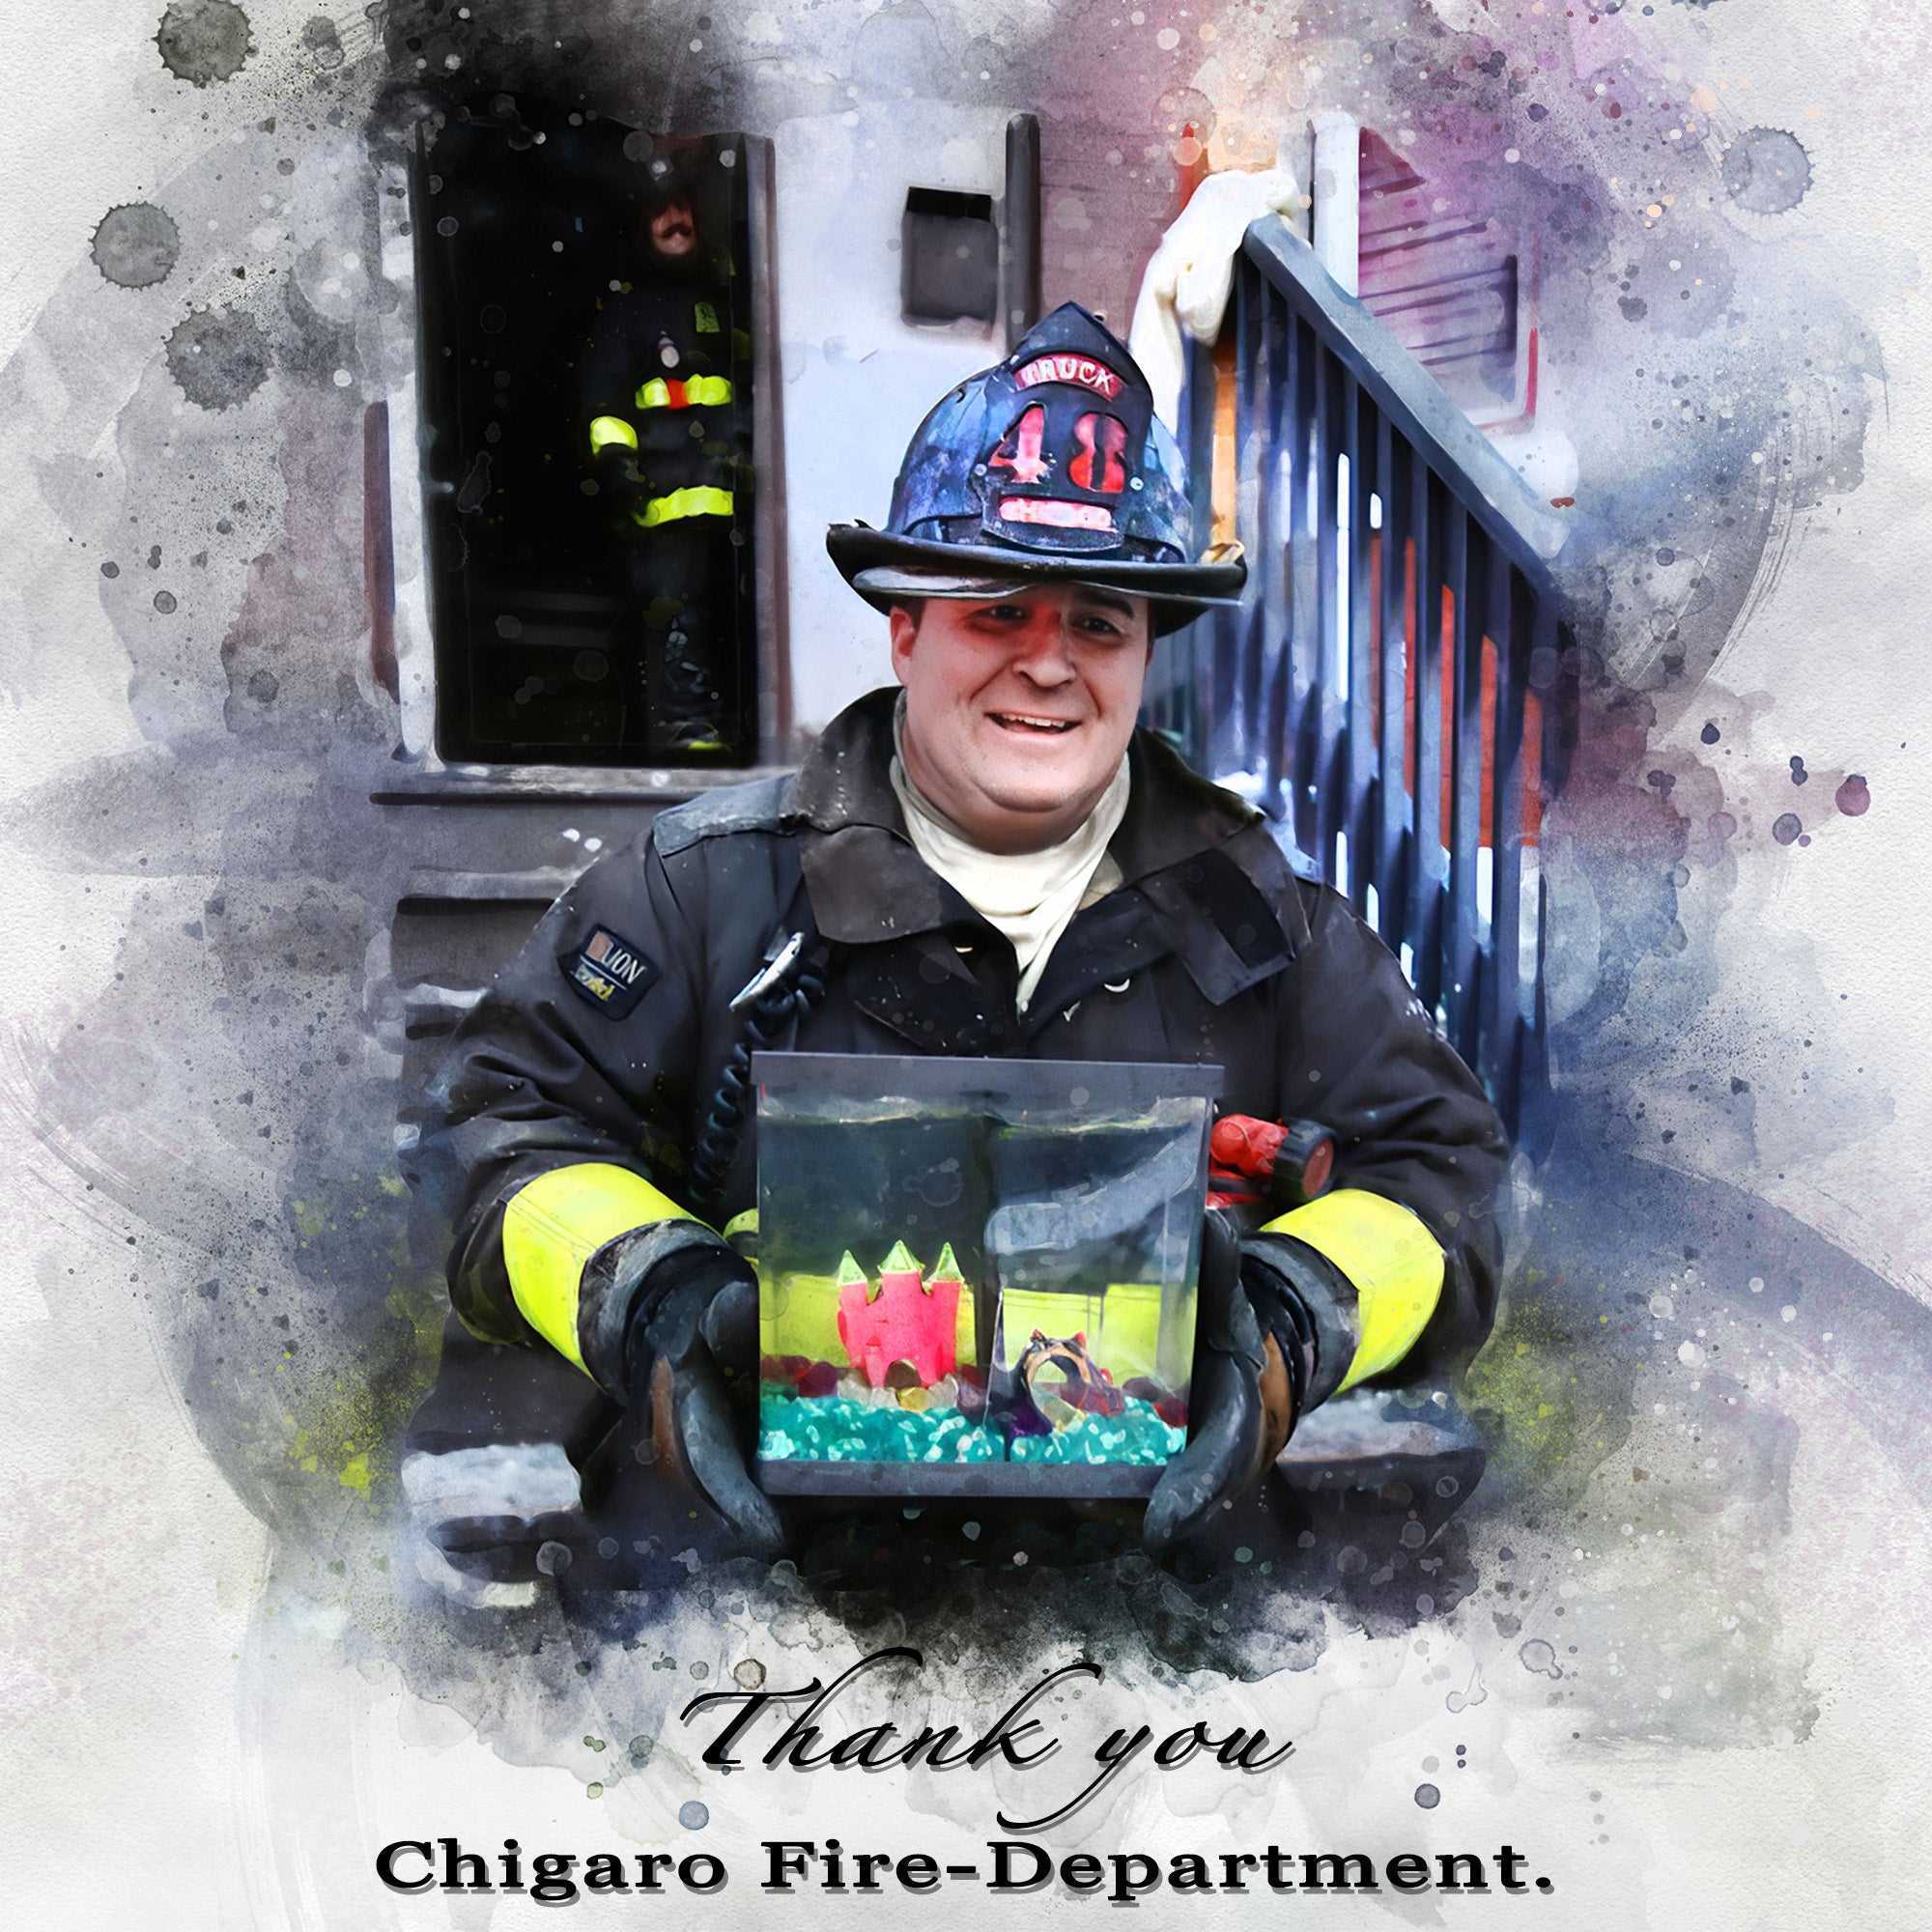 Christmas Gift for Firefighter | Gift Ideas for Firefighter | Fireman Gifts | Fire Department Gifts | Firefighter Presents Ideas - FromPicToArt